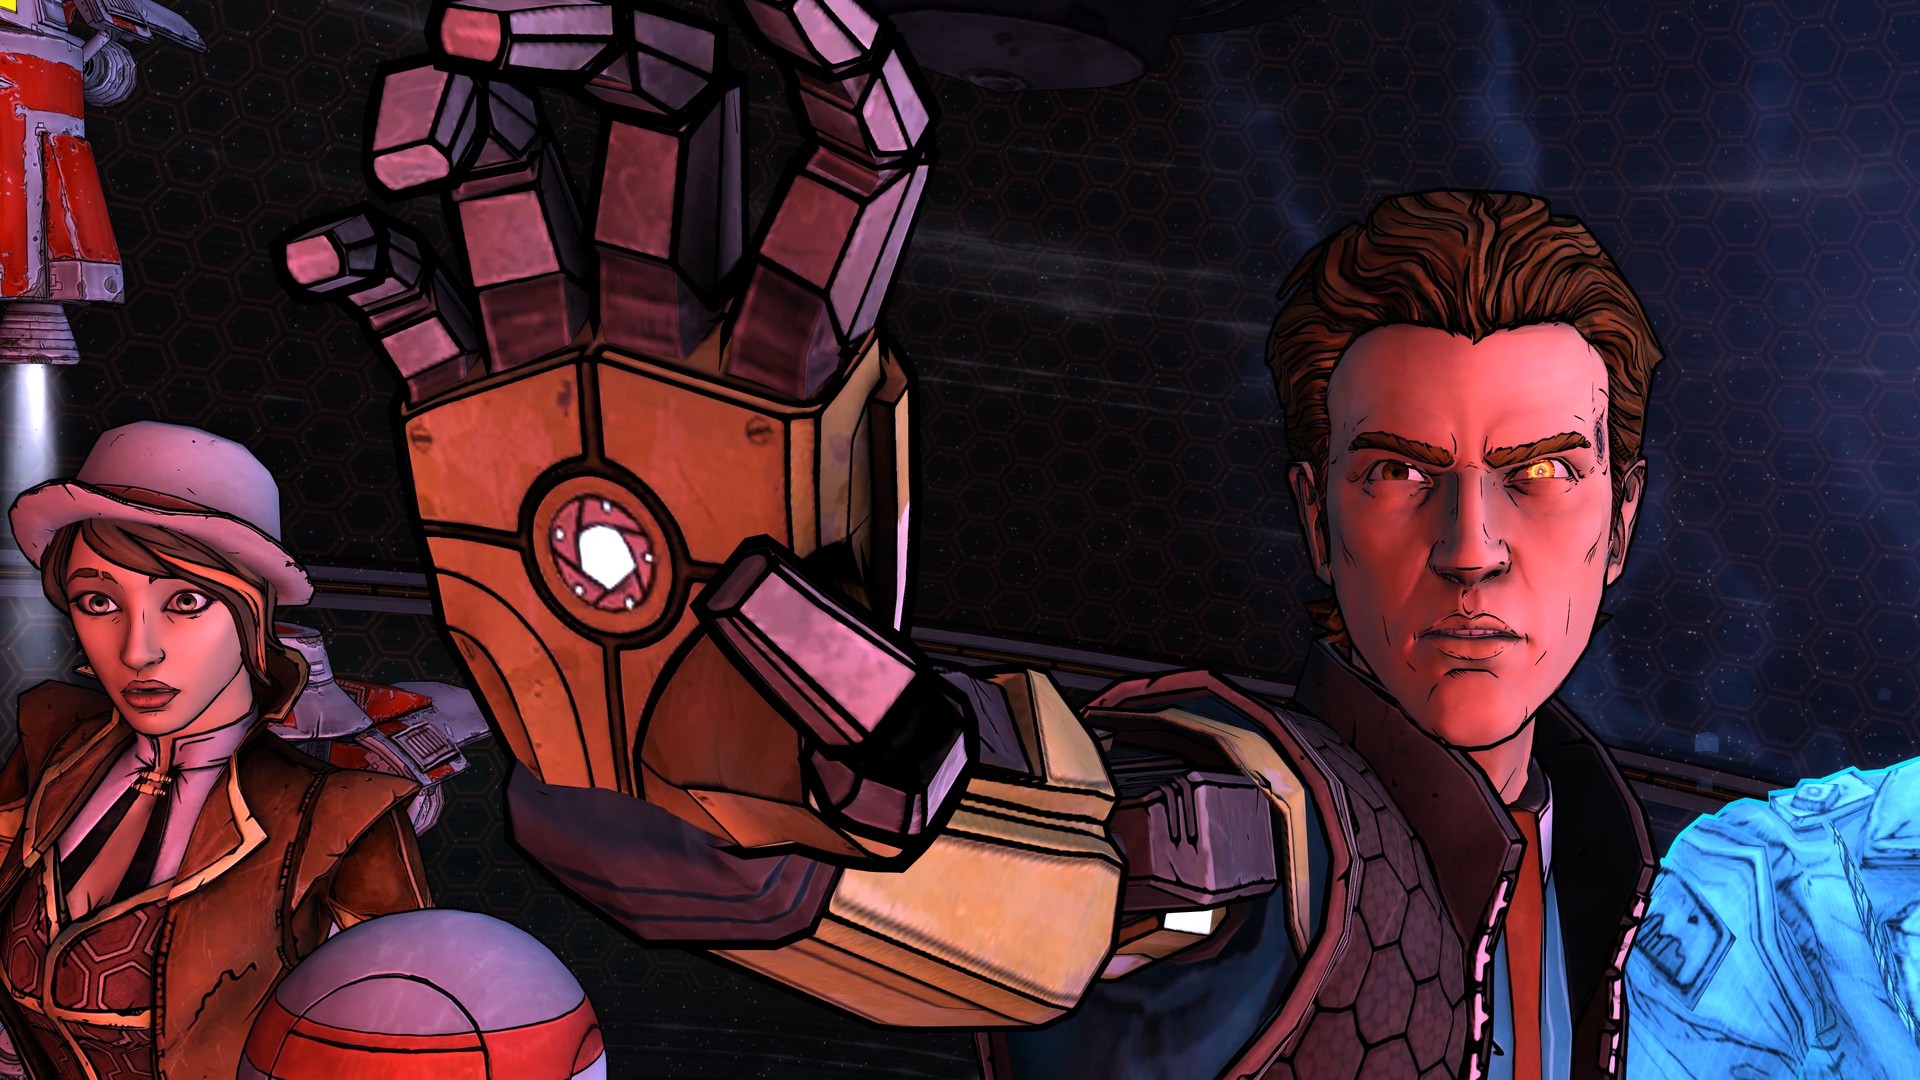 Tales-from-the-Borderlands-Cultura-Geek